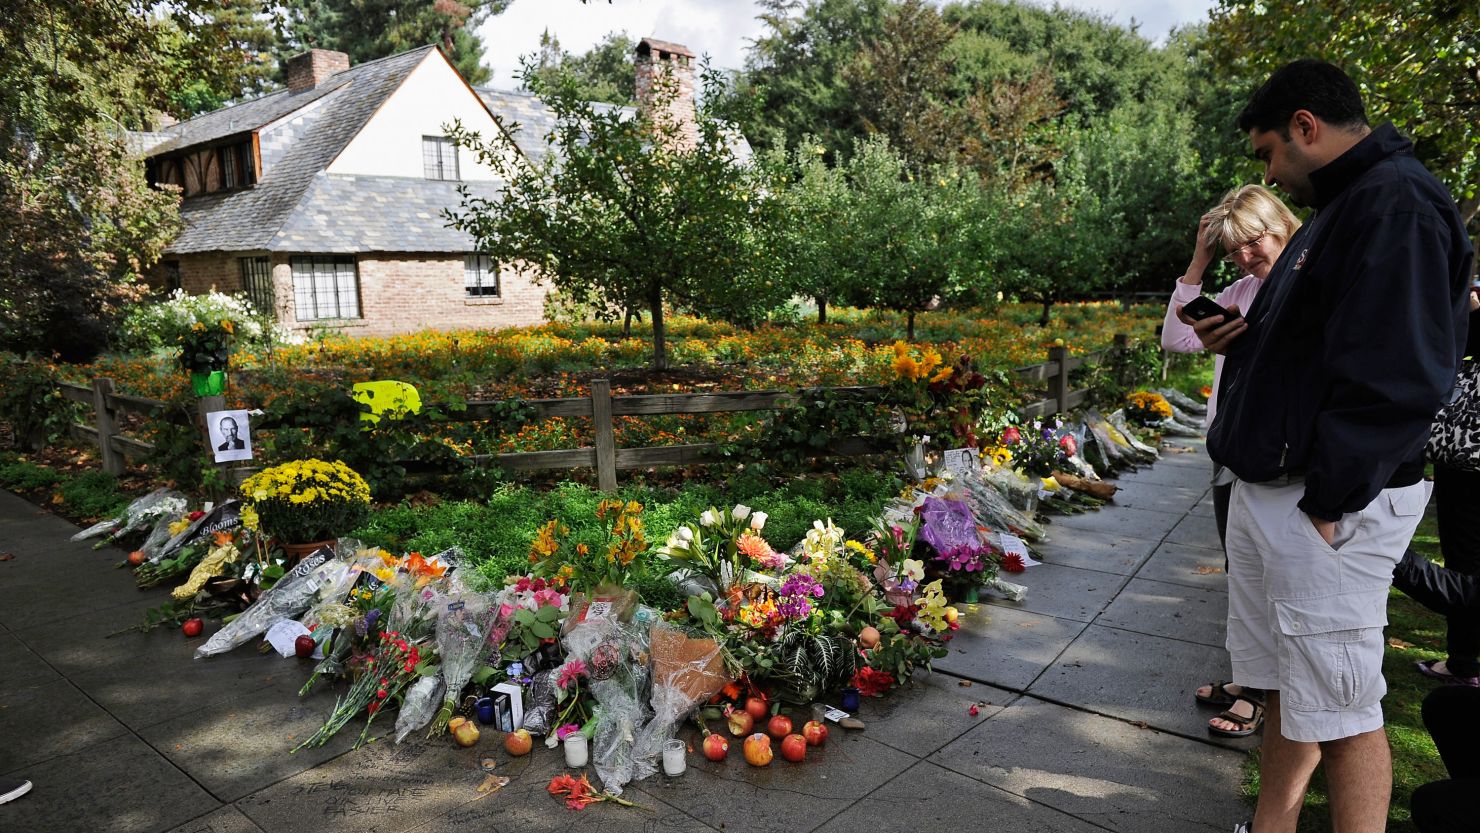 Mourners place flowers outside the Palo Alto, California, home of Apple co-founder Steve Jobs after his death last year.